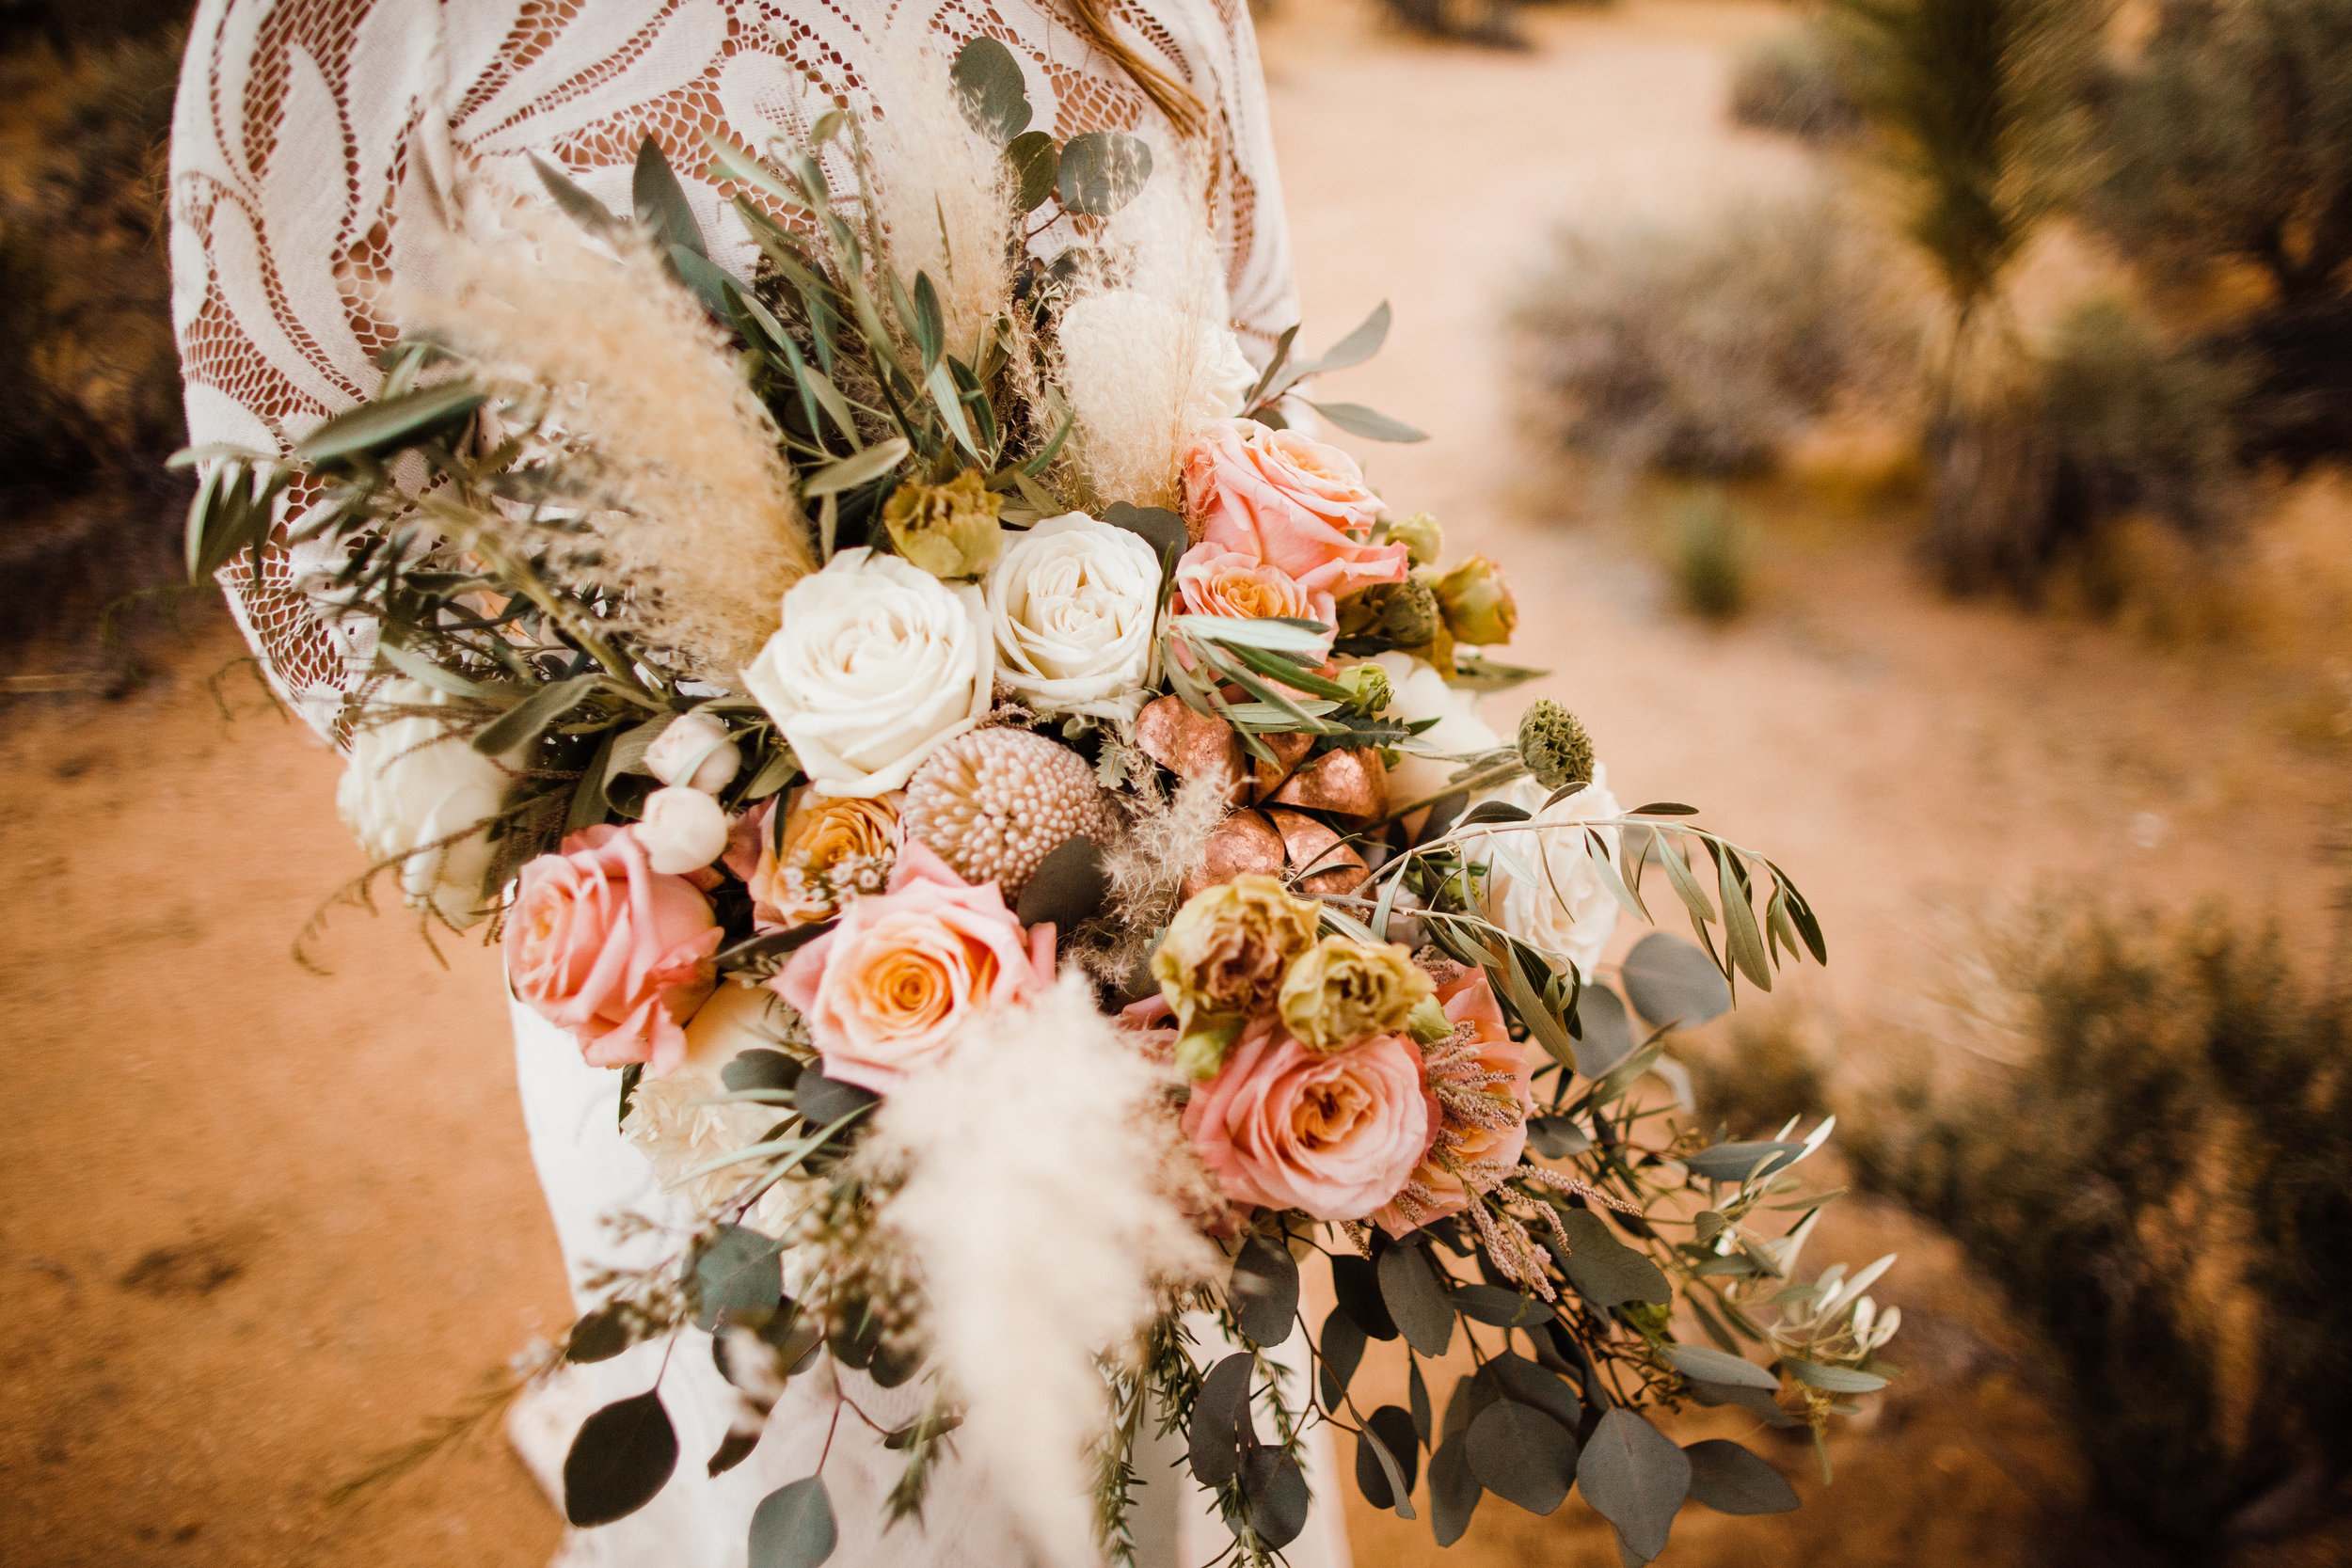 bridal bouquet of dried pampas grass, feathery elements and a copper rose mixed in with white and pink flowers